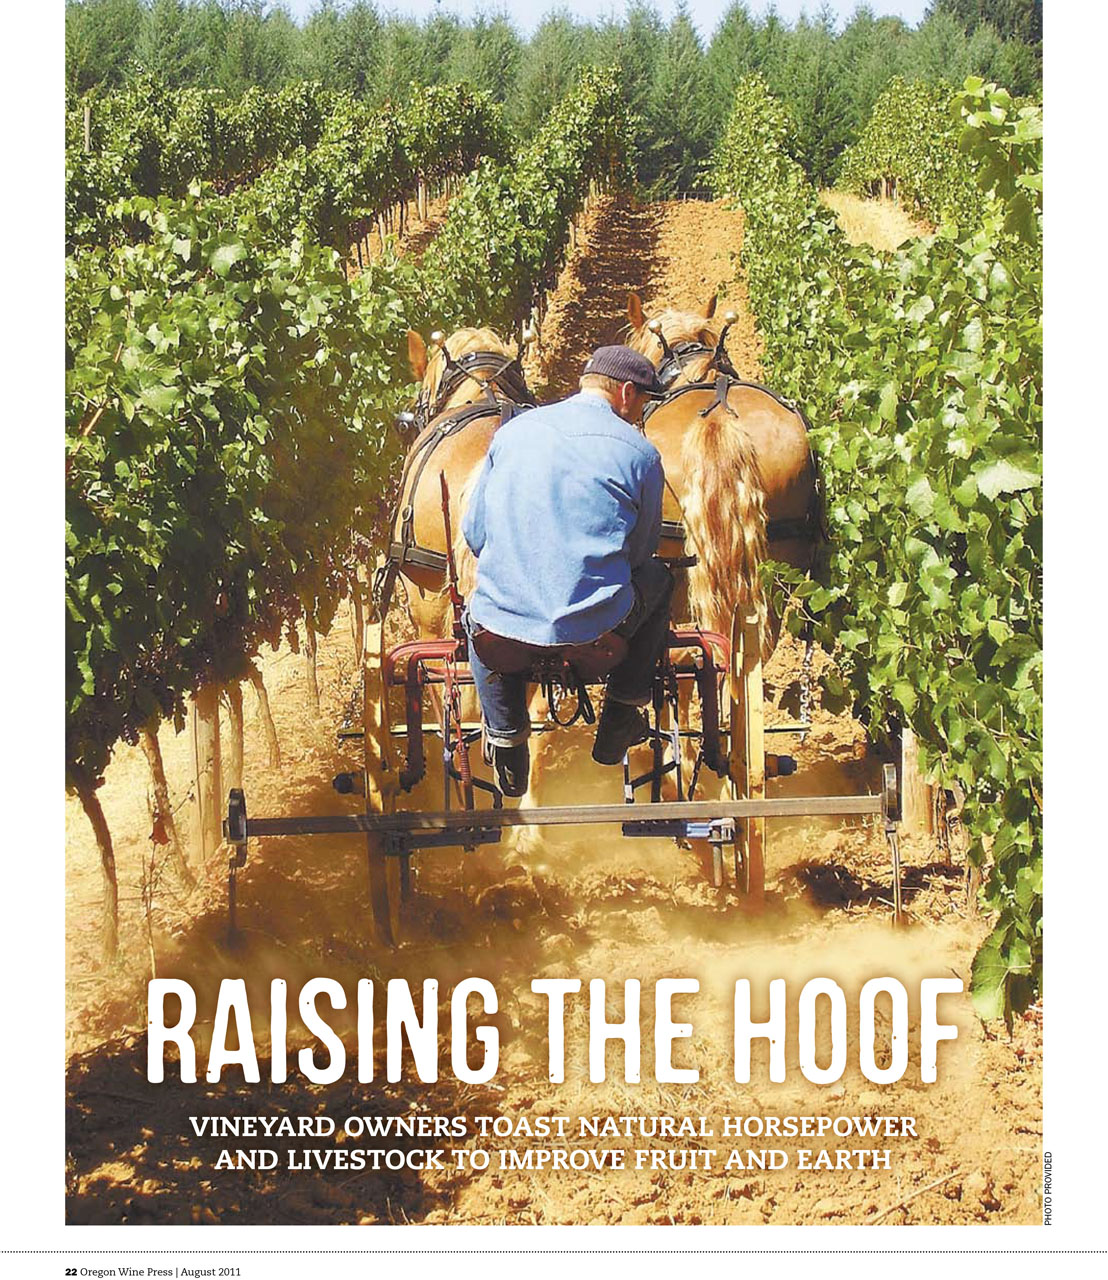 Raising the Hoof: Vineyard owners toast natural horsepower and livestock to improve fruit and earth